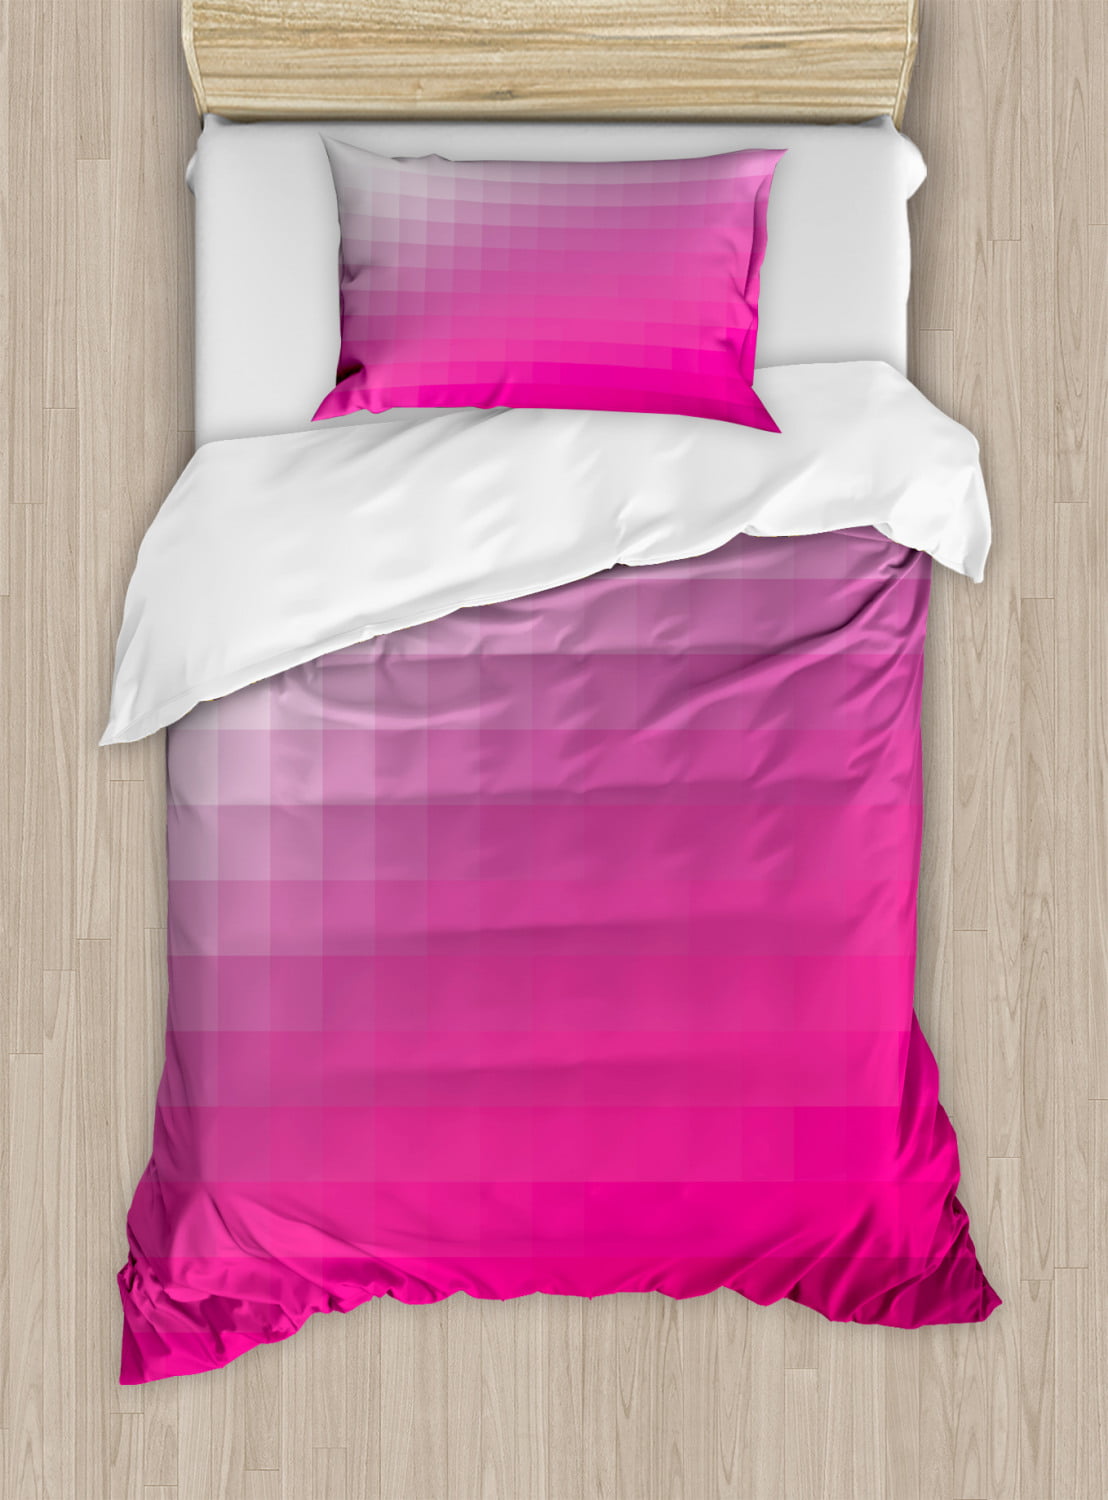 Hot Pink Duvet Cover Set Twin Size, Pink Duvet Cover Twin